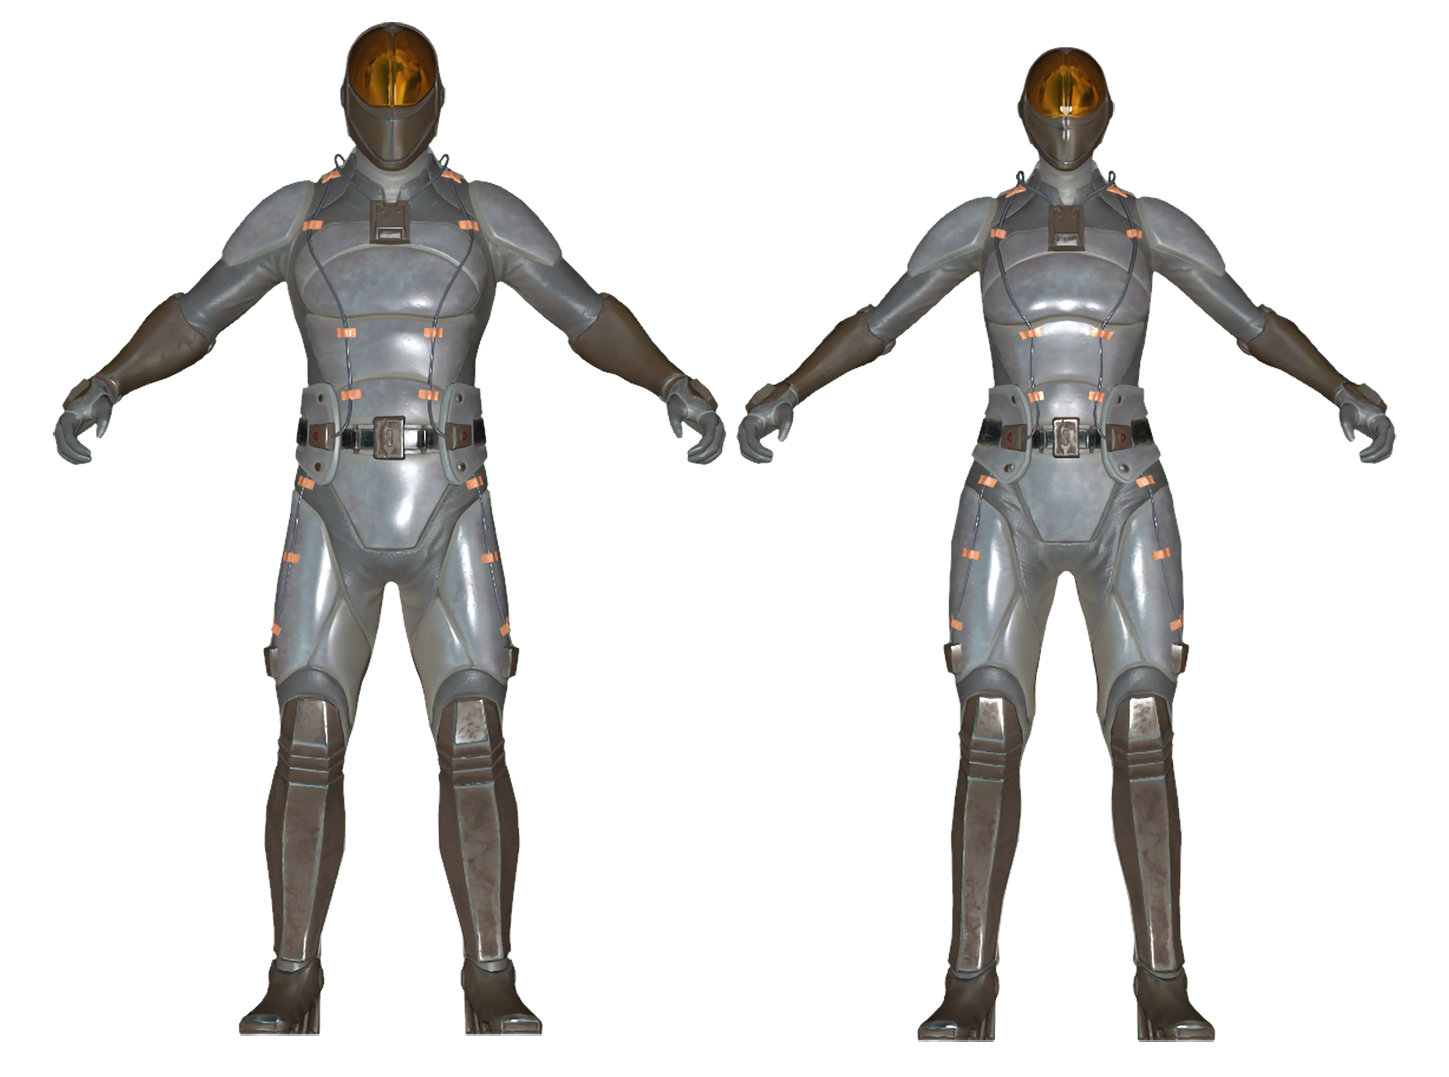 https://images.fallout.wiki/c/c0/FO4cc_chinese_stealth_armor.png